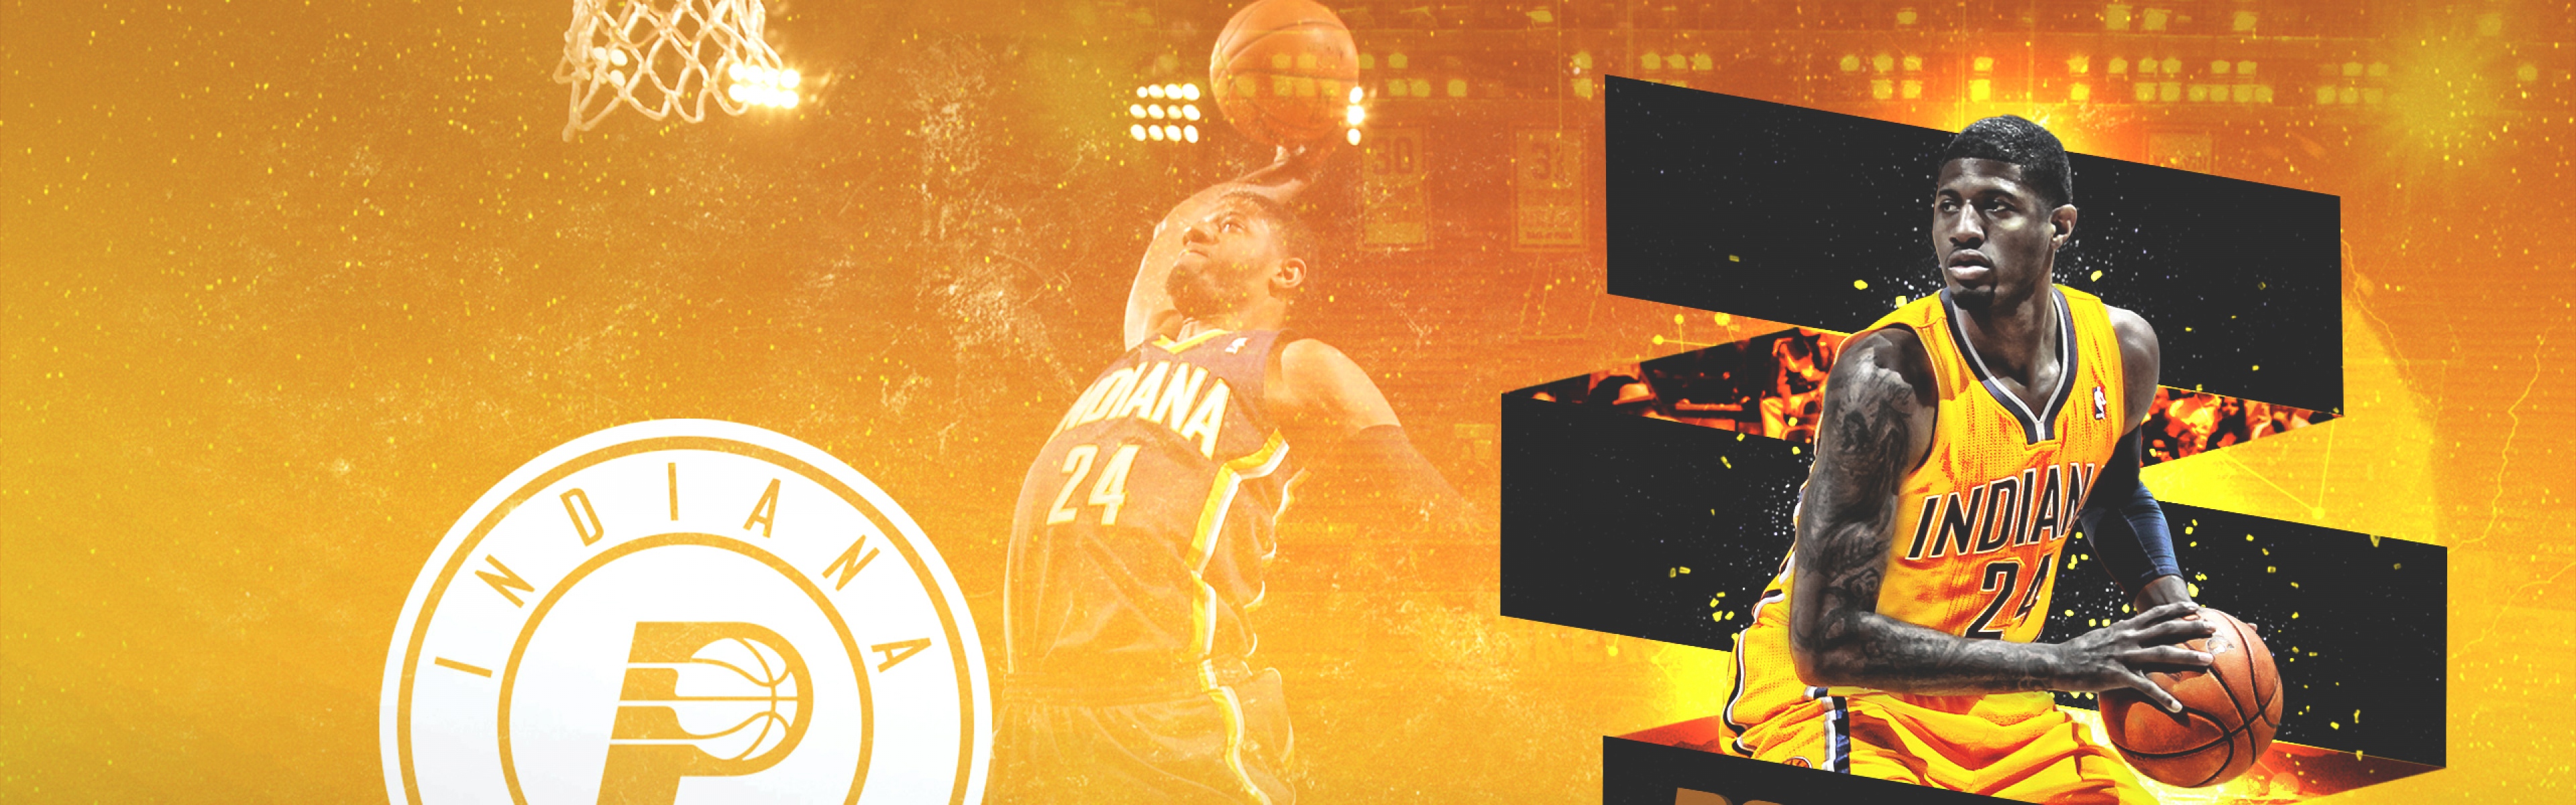 Download Wallpaper 3840x1200 paul george indiana pacers basketball